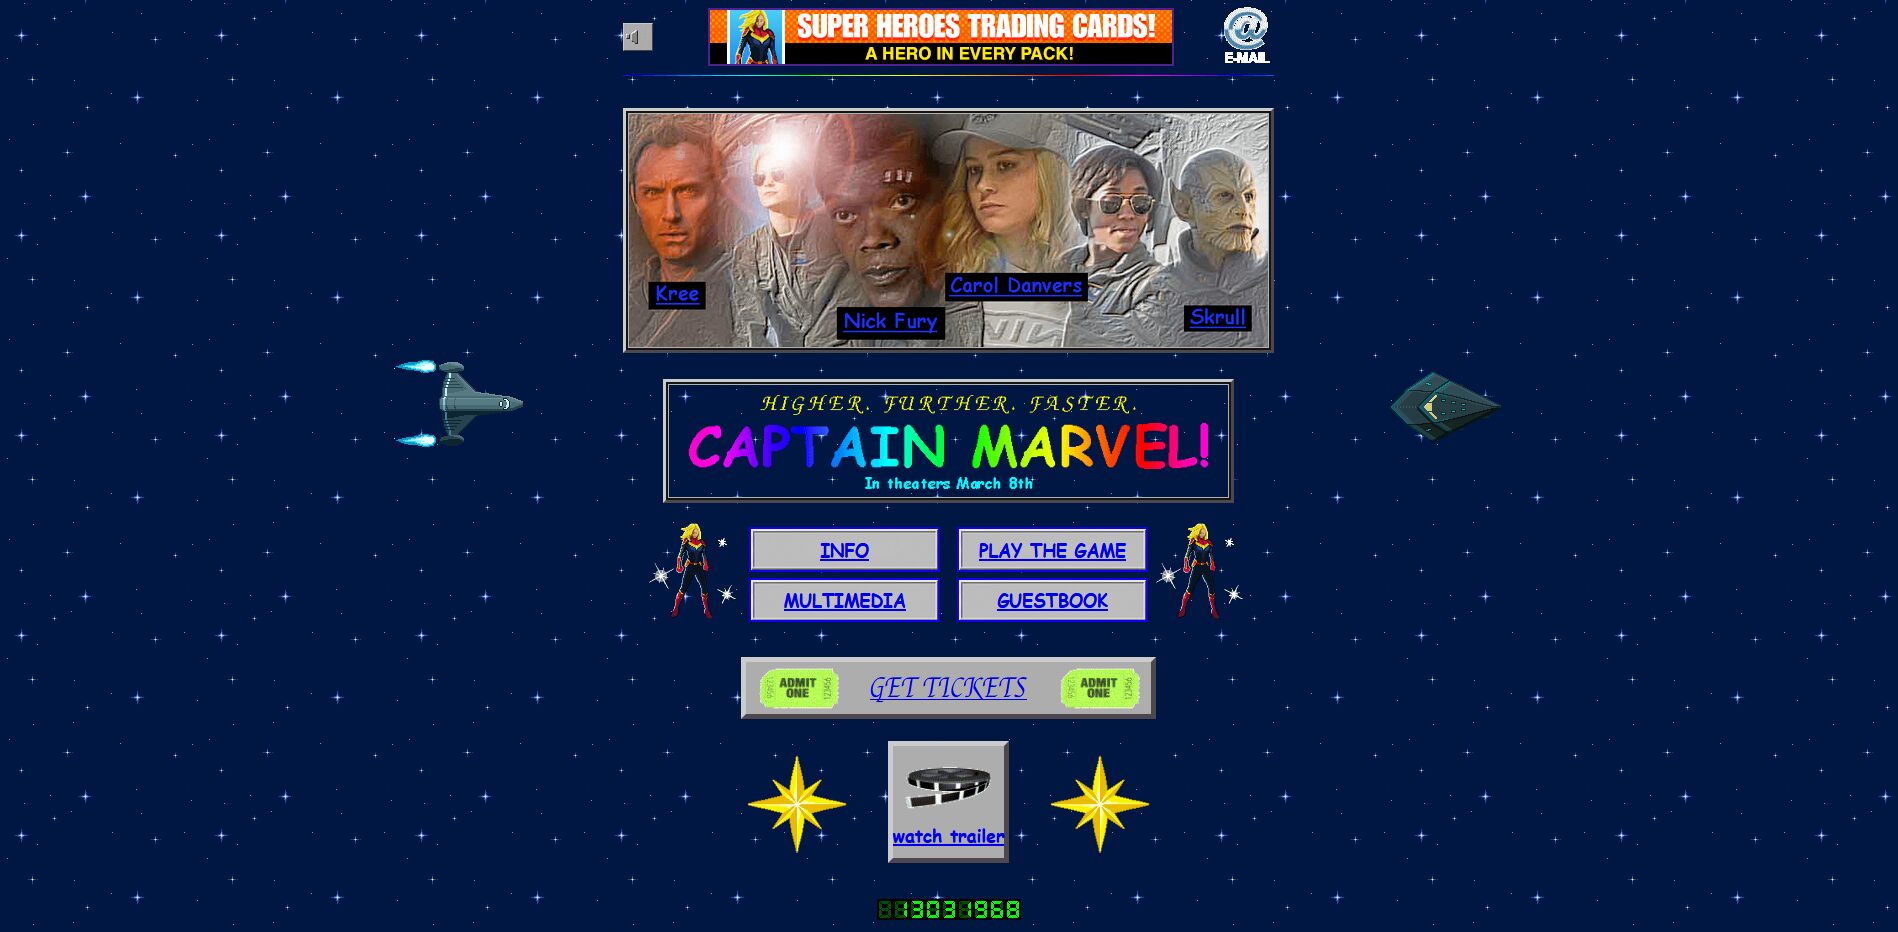 The Captain Marvel Site Is A Blast From The Web’s Past